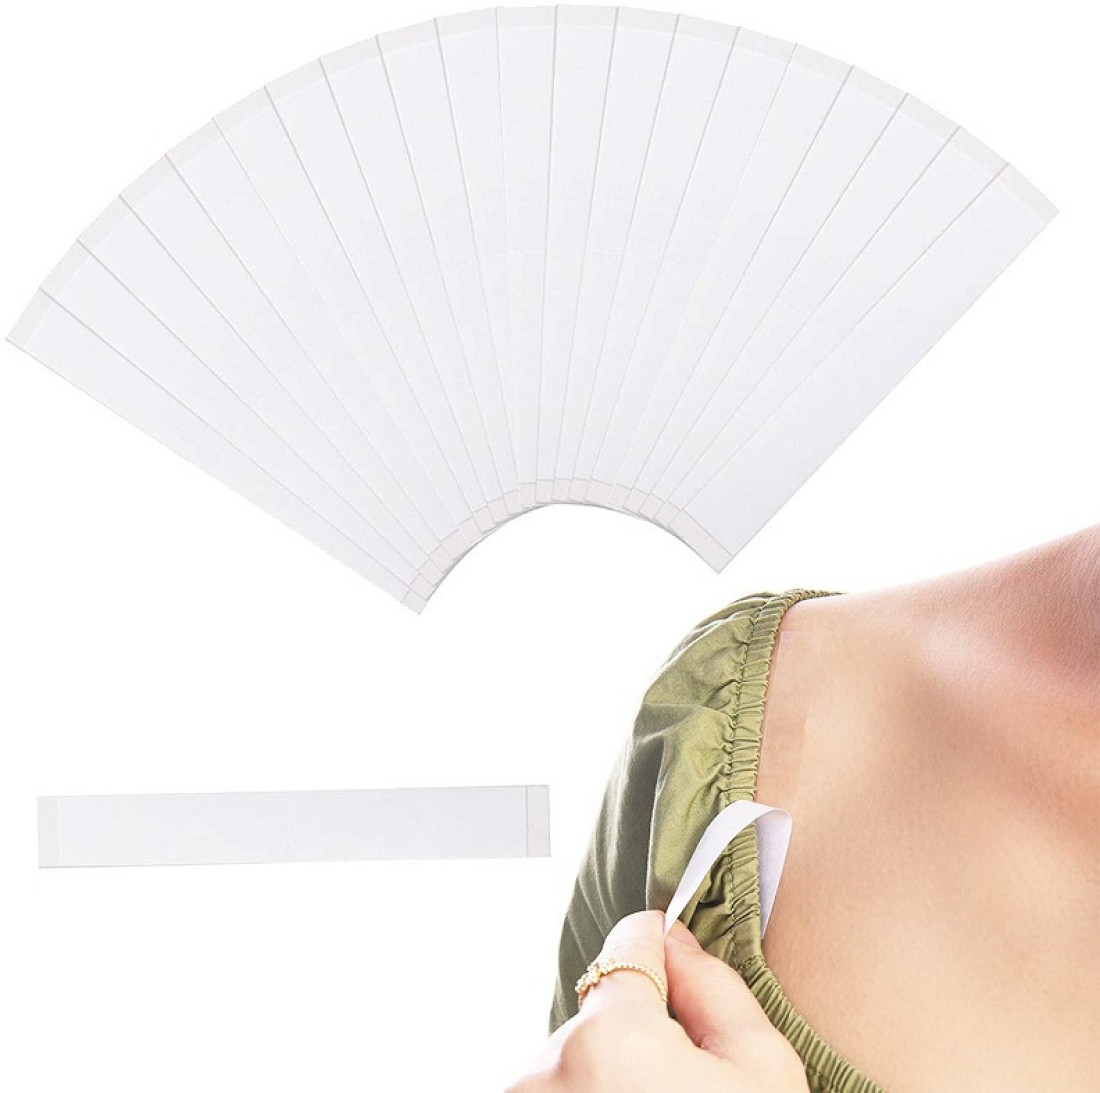 Nyamah sales Double-Sided Fashion Body Tape Self-adhesive Clear